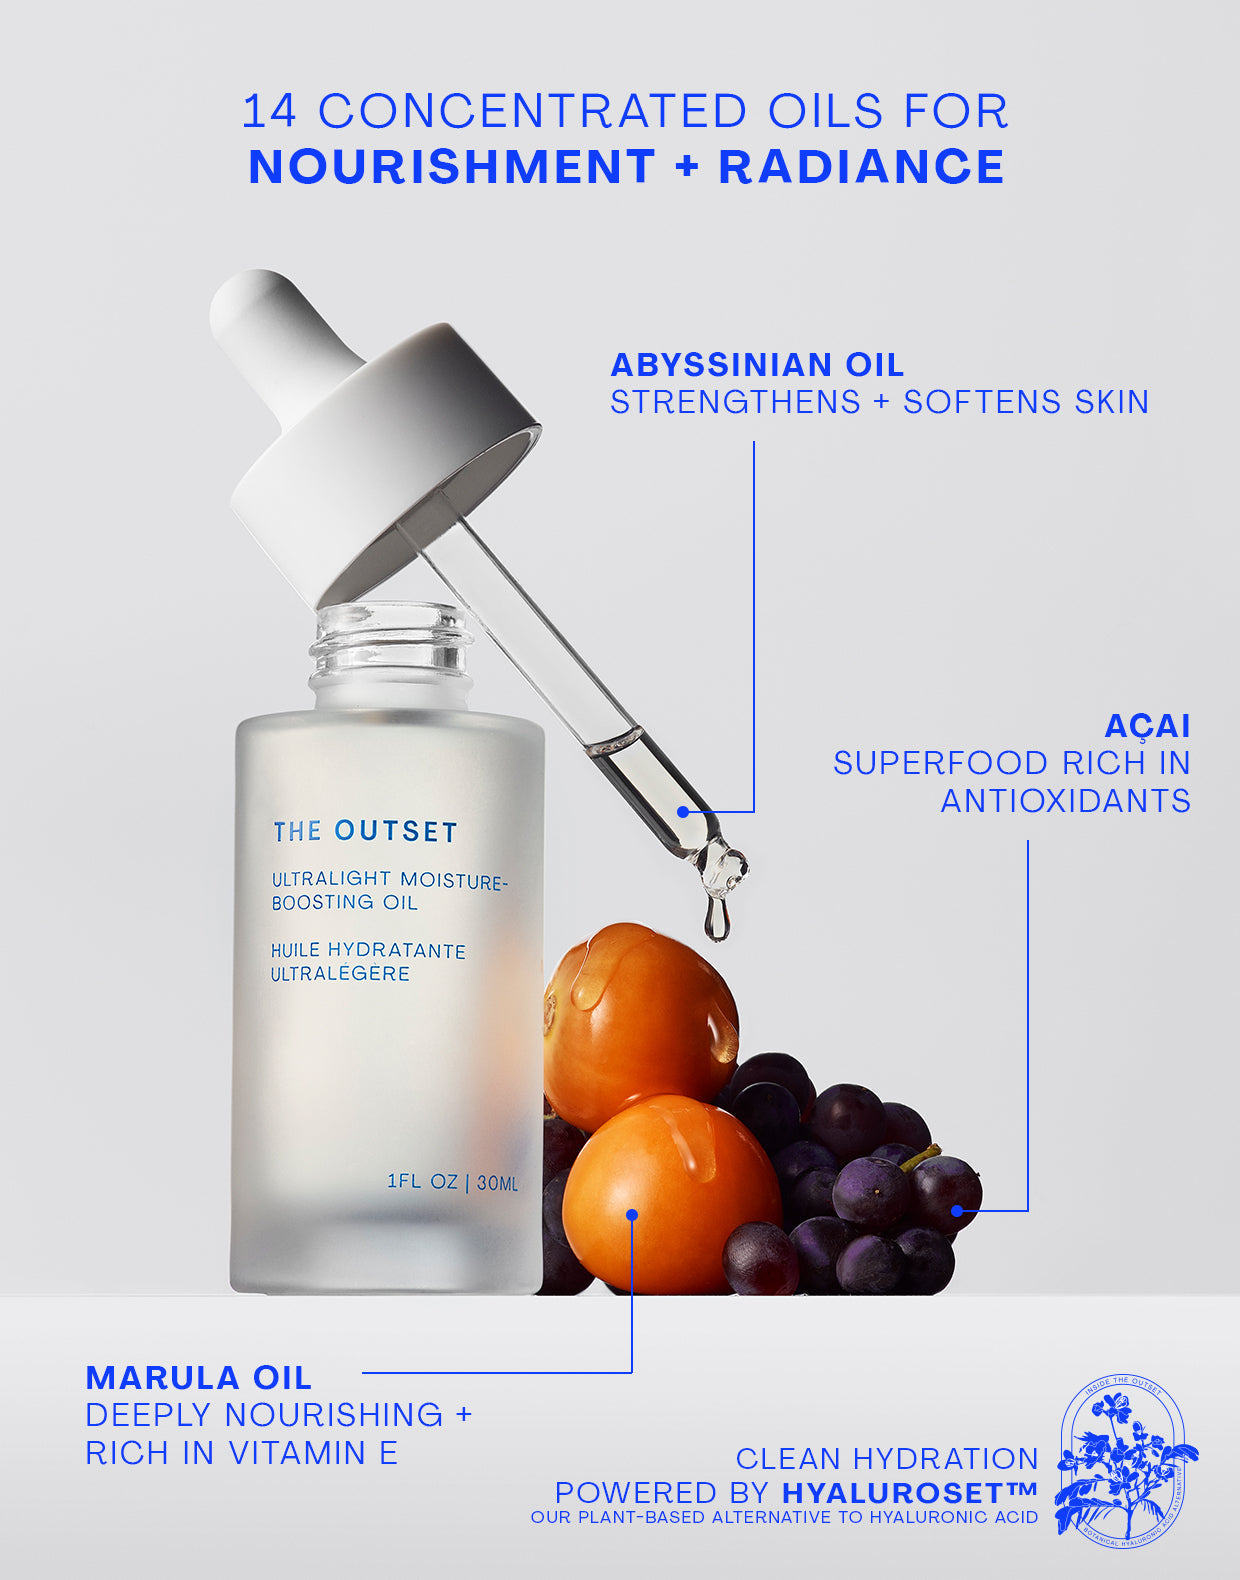 Photo of The Outset's ultralight moisture-boosting oil with ingredients and text; 14 concentrated oils for nourishment + radiance; abyssinian oil strengthens + softens skin; acai superfood rich in antioxidants ; marula oil deeply nourishing + rich in vitamin e; hyaluroset badge